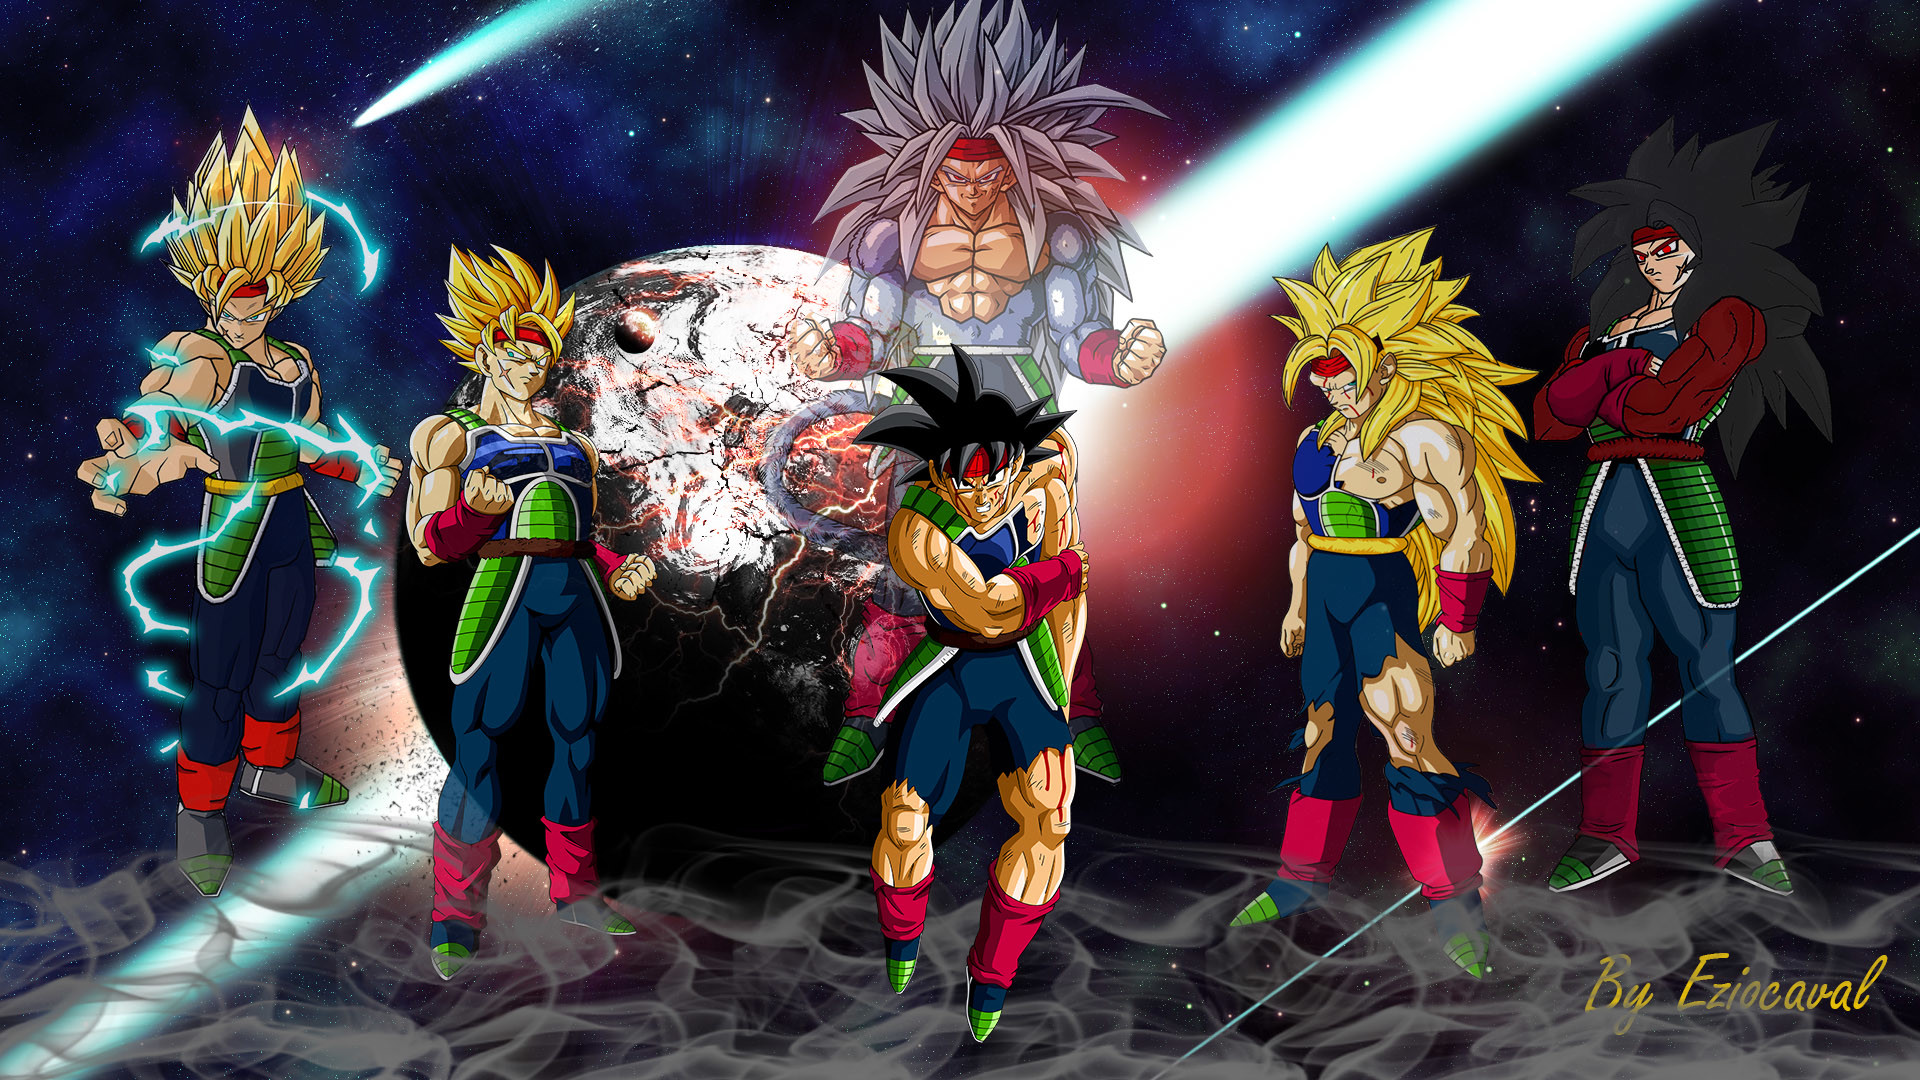 Download Bardock Dragon Ball wallpapers for mobile phone free Bardock  Dragon Ball HD pictures